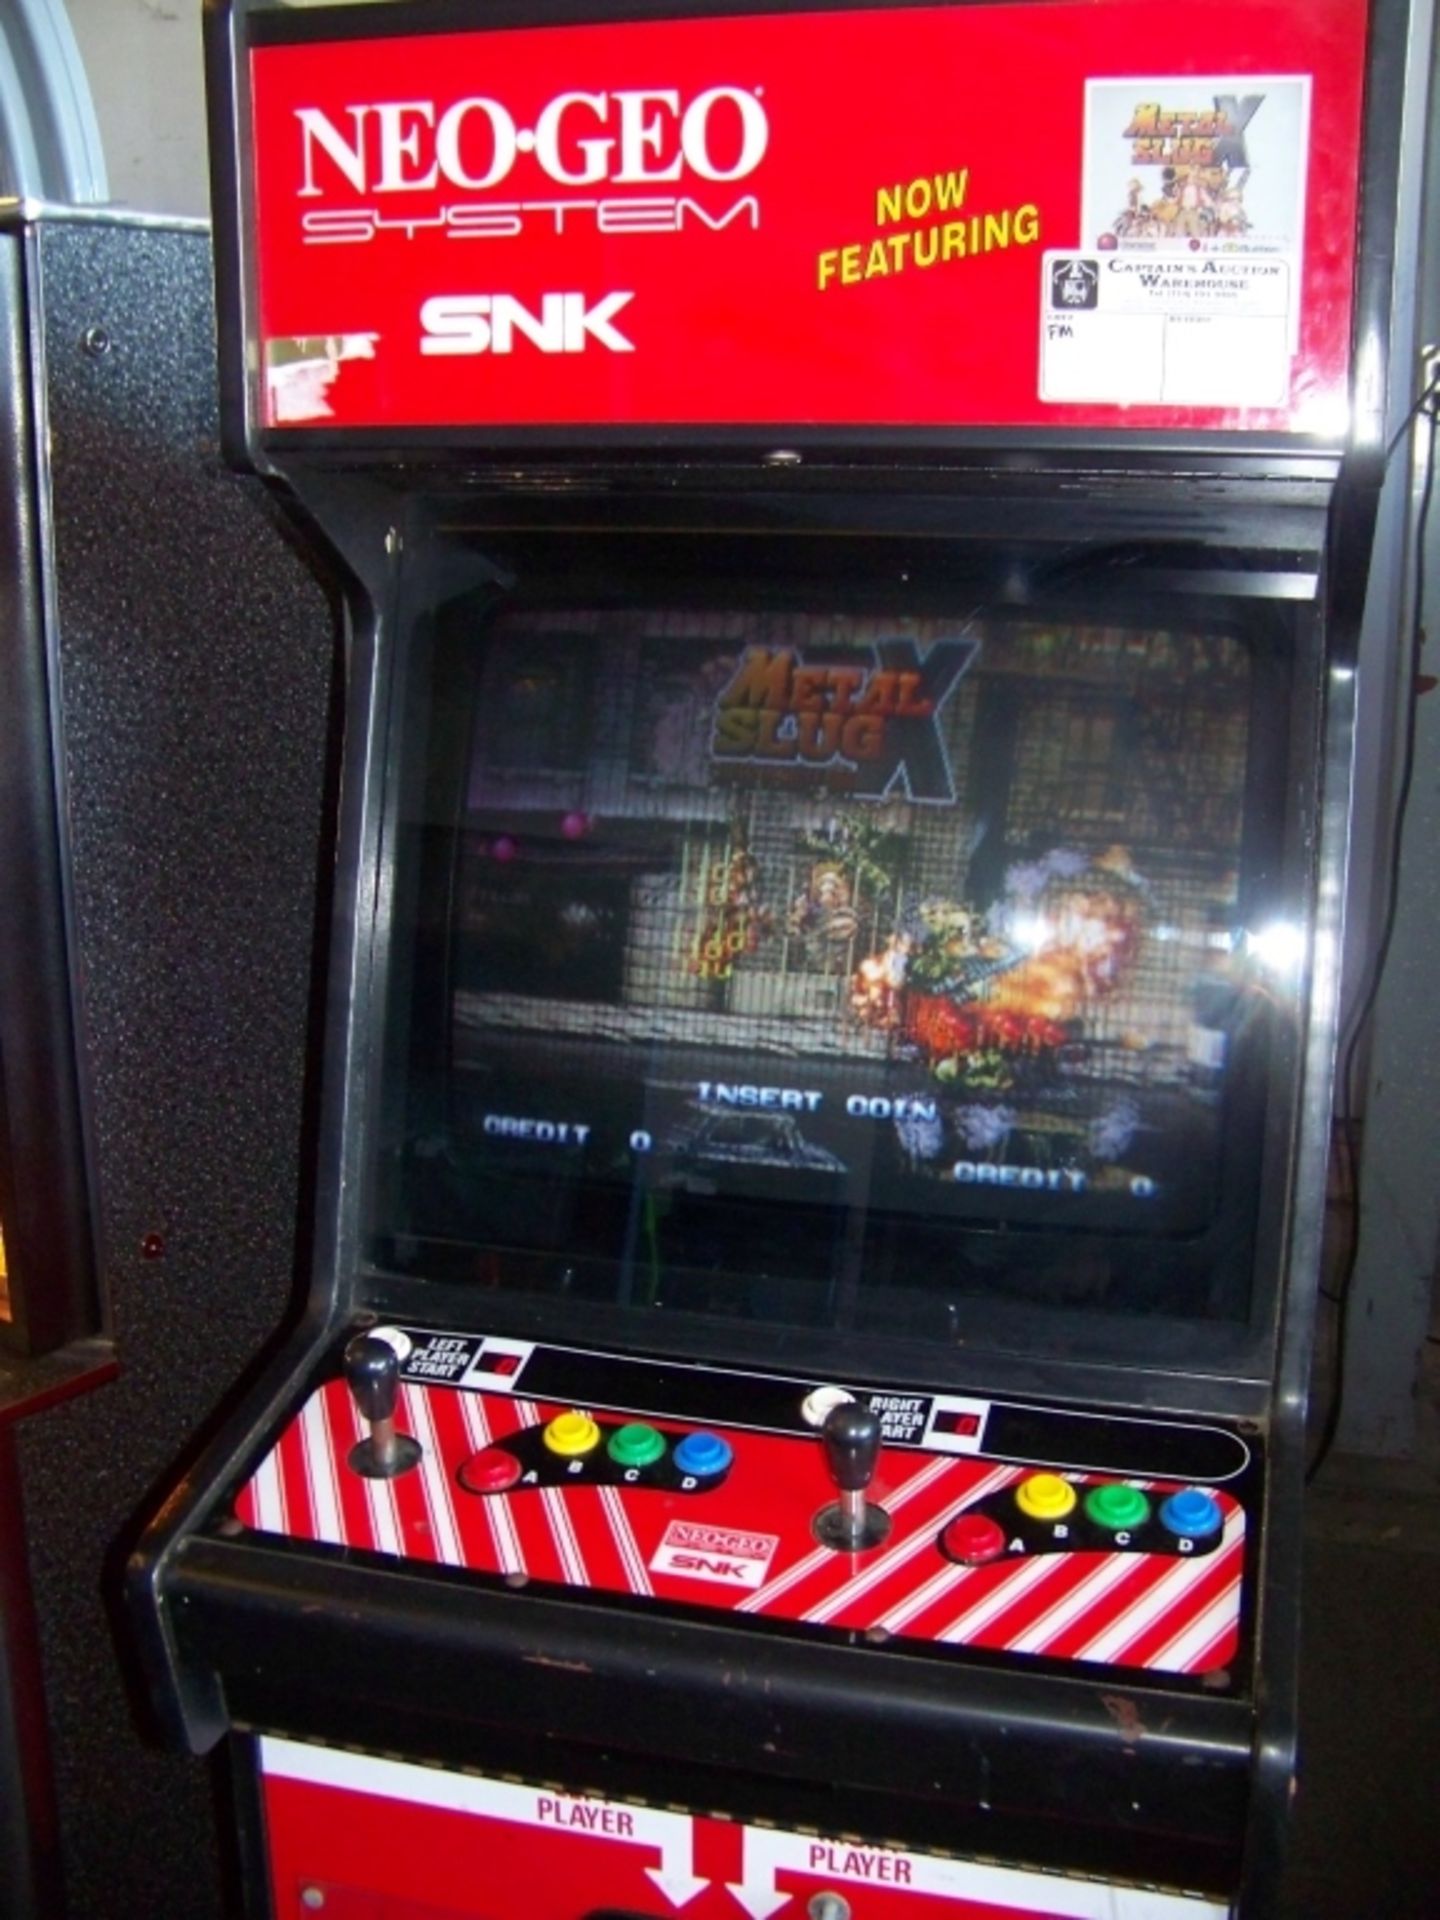 NEO GEO 1SLOT SNK DEDICATED ARCADE GAME Item is in used condition. Evidence of wear and commercial - Image 2 of 3